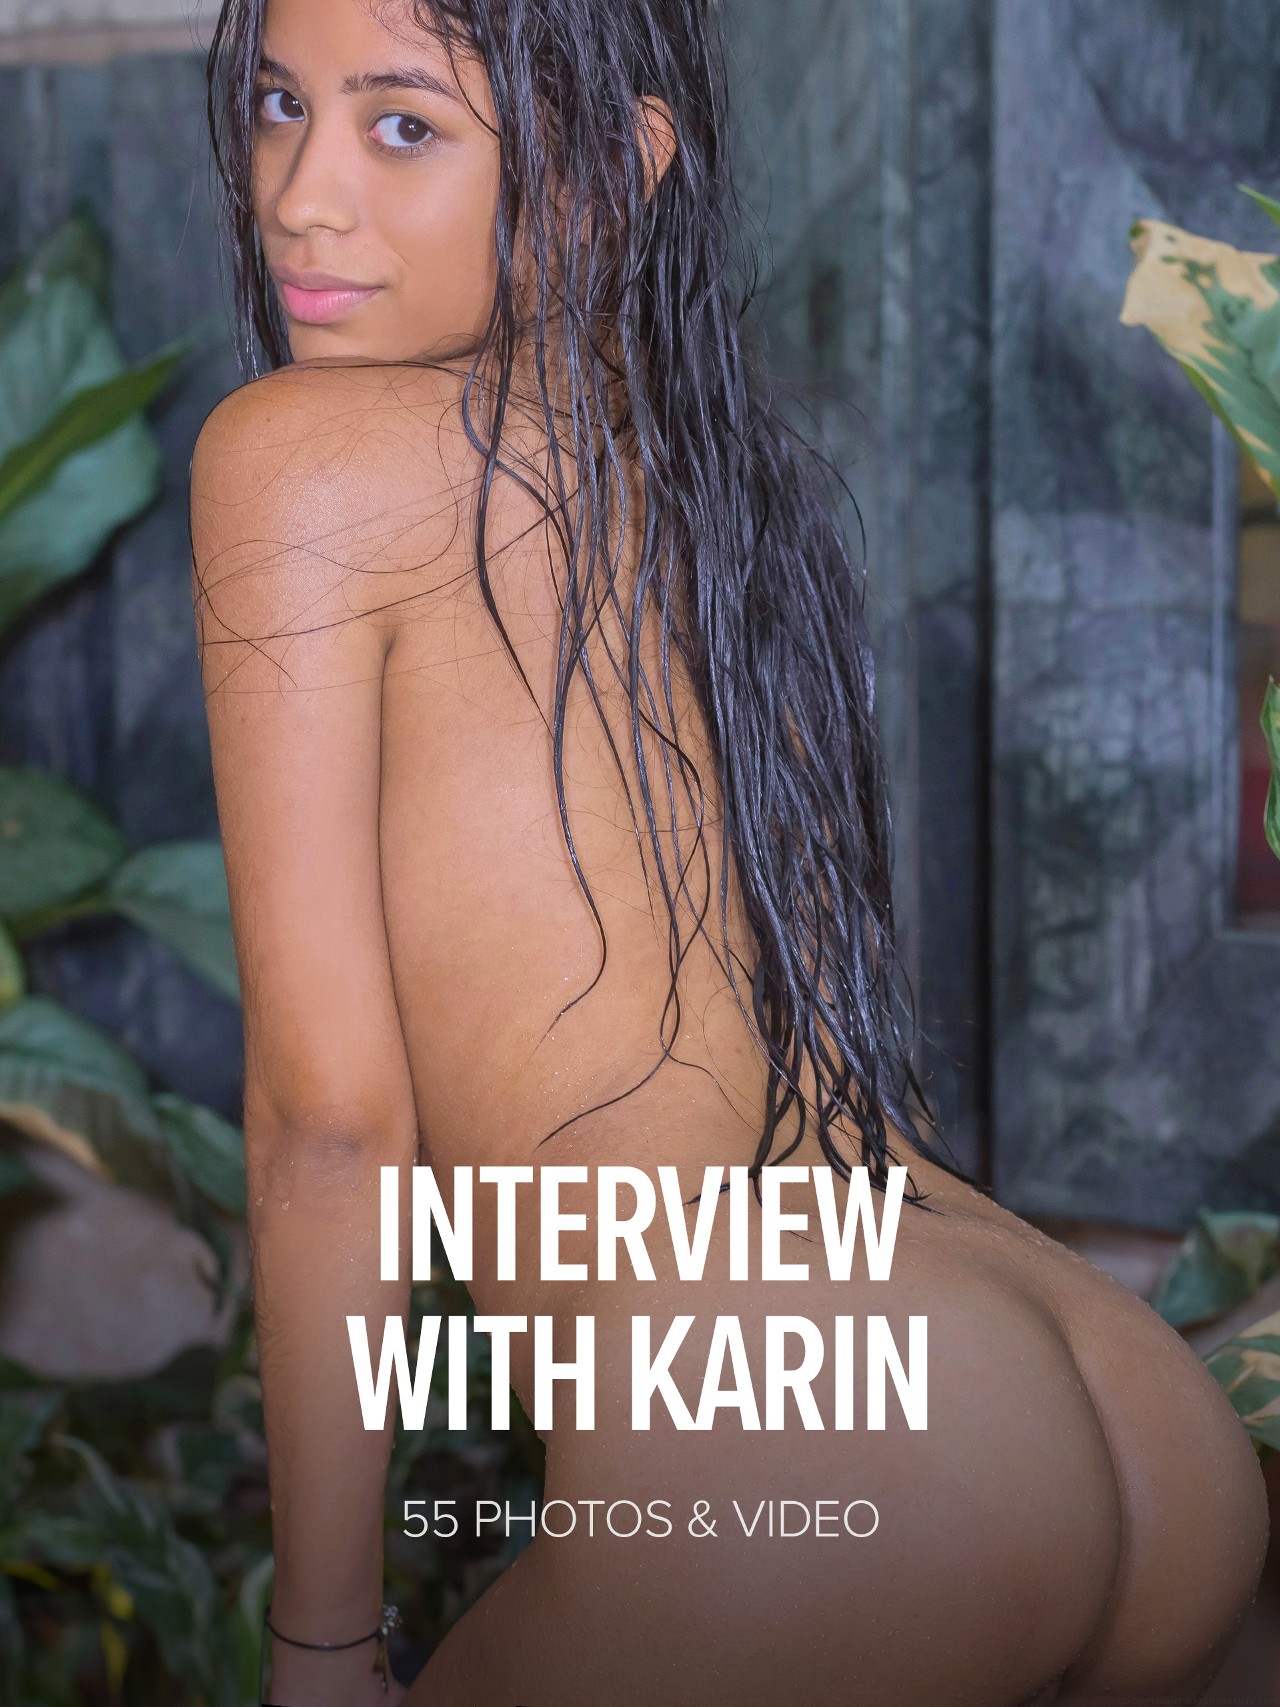 Everything you want to know about our new Venezuelan beauty - Karin. And more: a set of very hot photos of this stunning lady. AND she even shares her talent for singing in video.